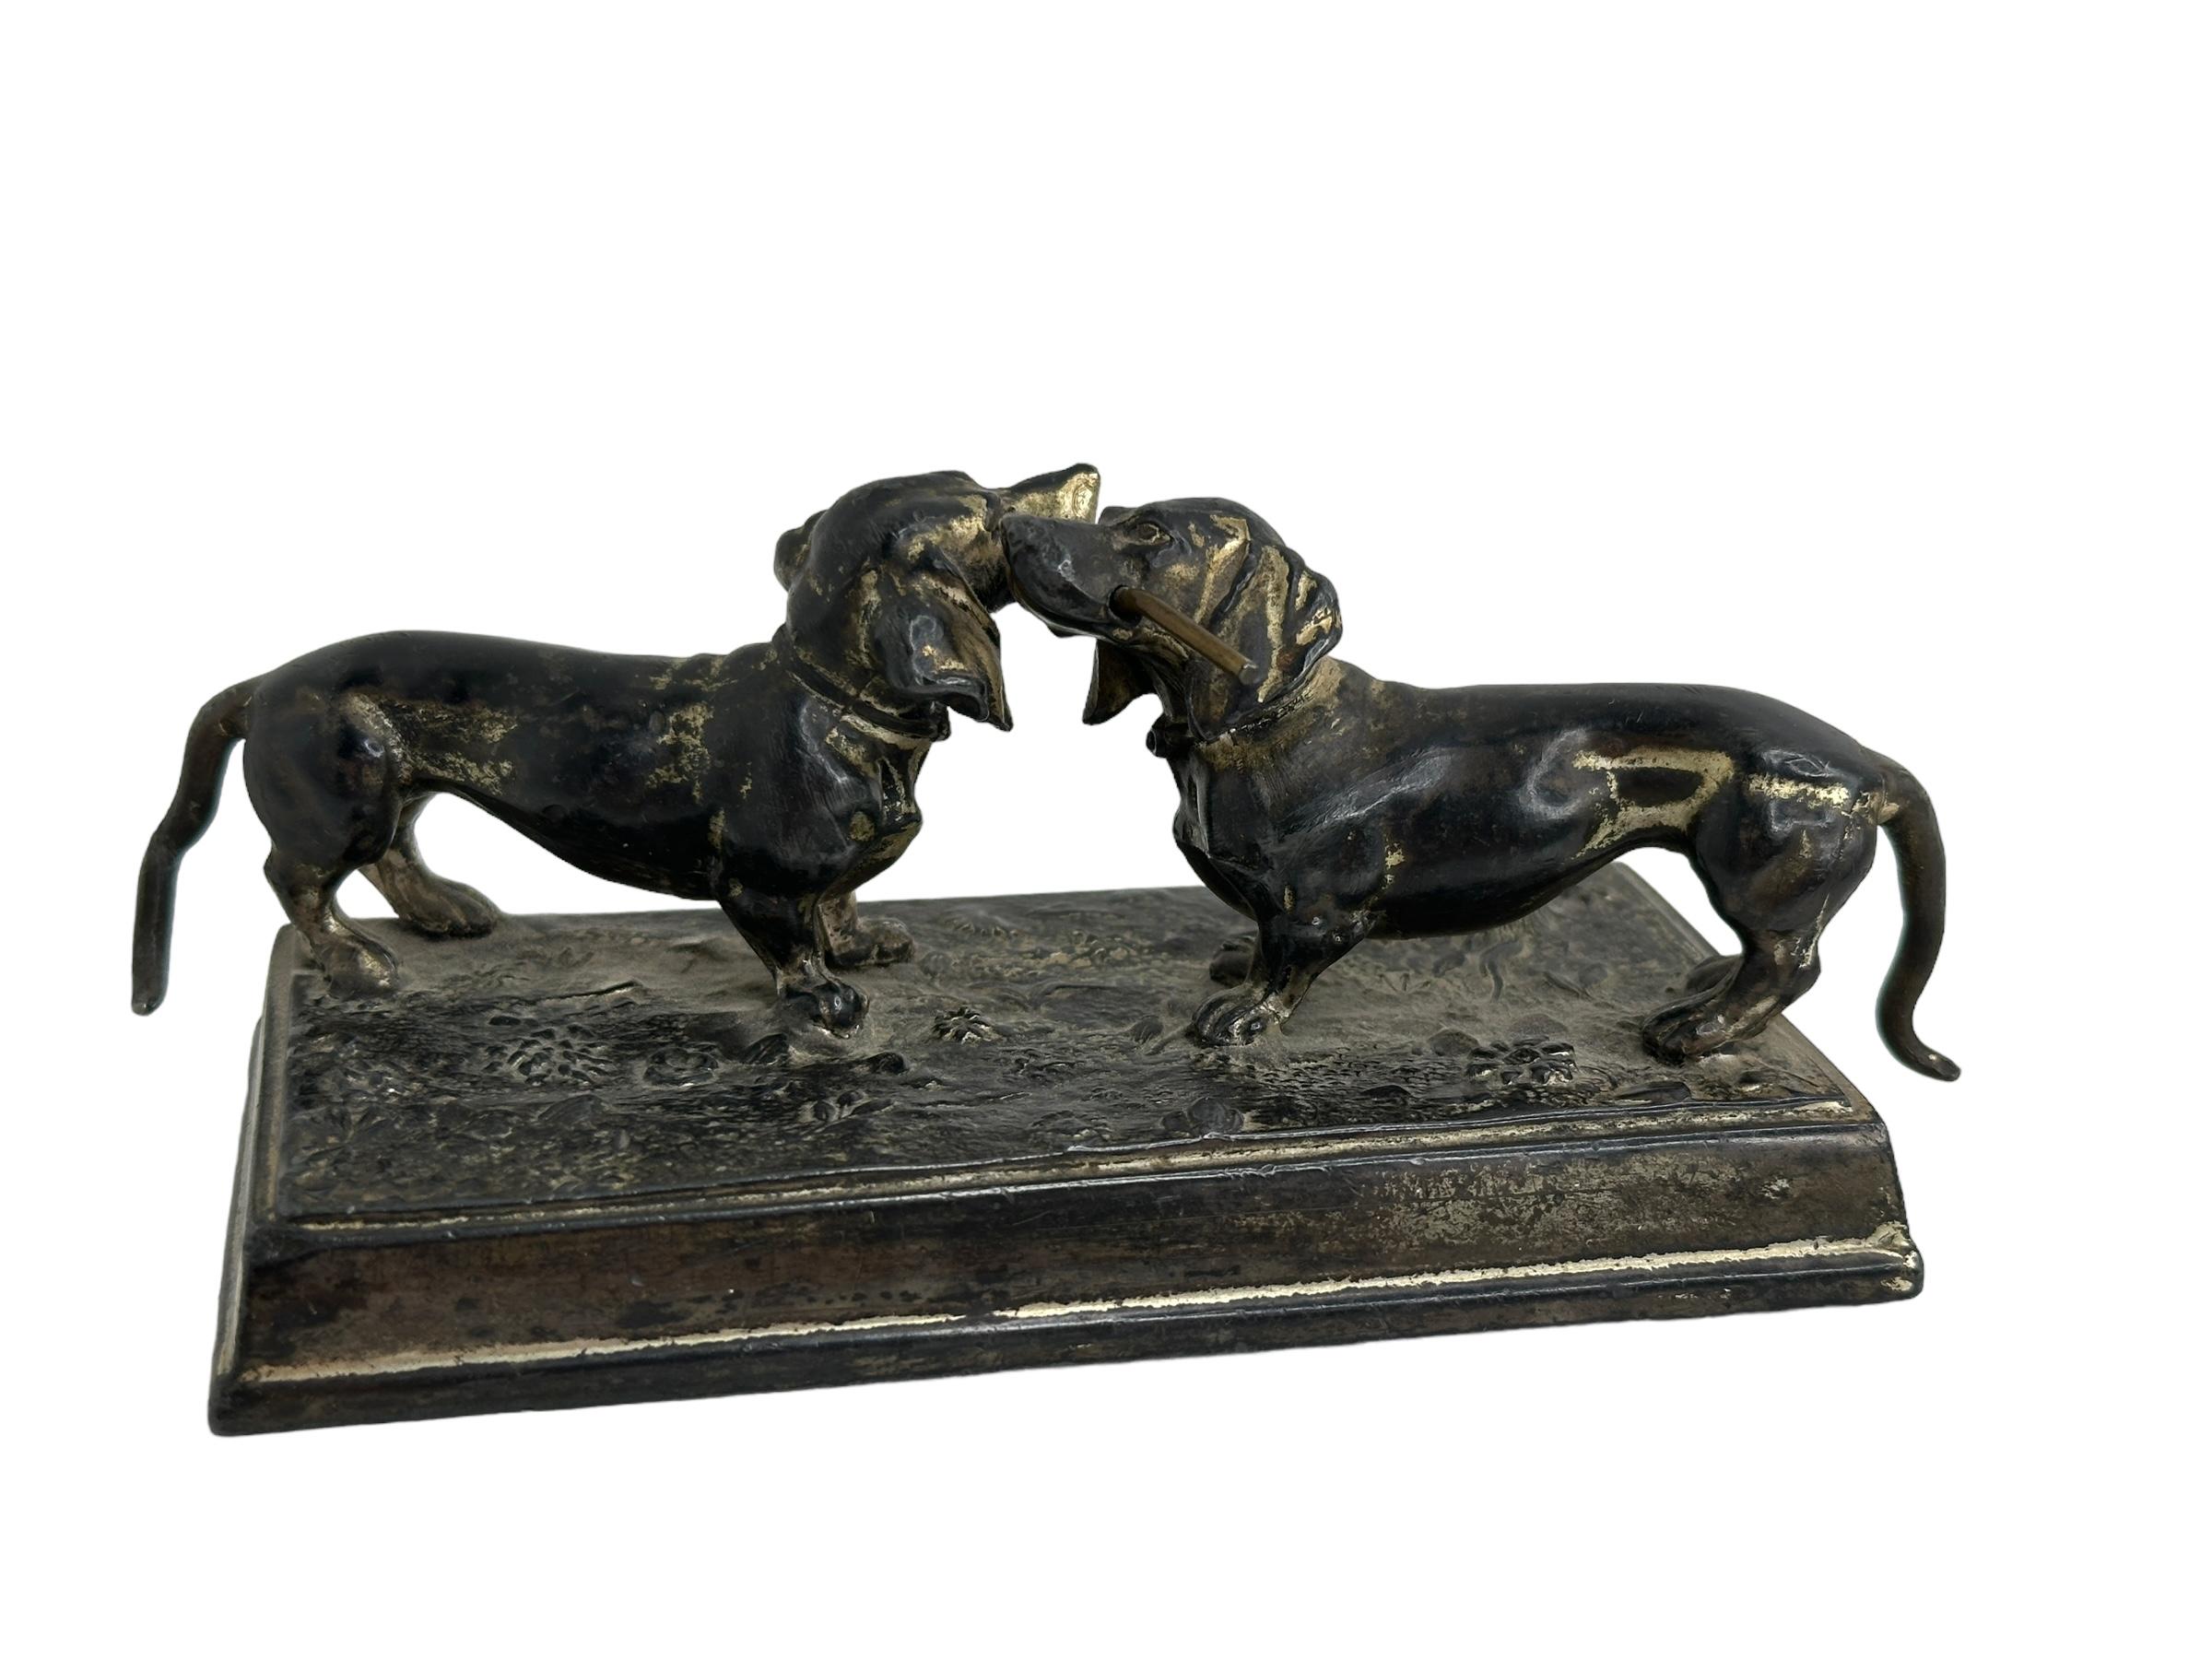 Classic early 1910s metal (bronze) figurine. Shows two dachshunds fighting over a stick. Found at an estate sale in Nuremberg, Germany. Marked with Germany.
A nice addition to any collection. You can use it also as paperweight at your table. 